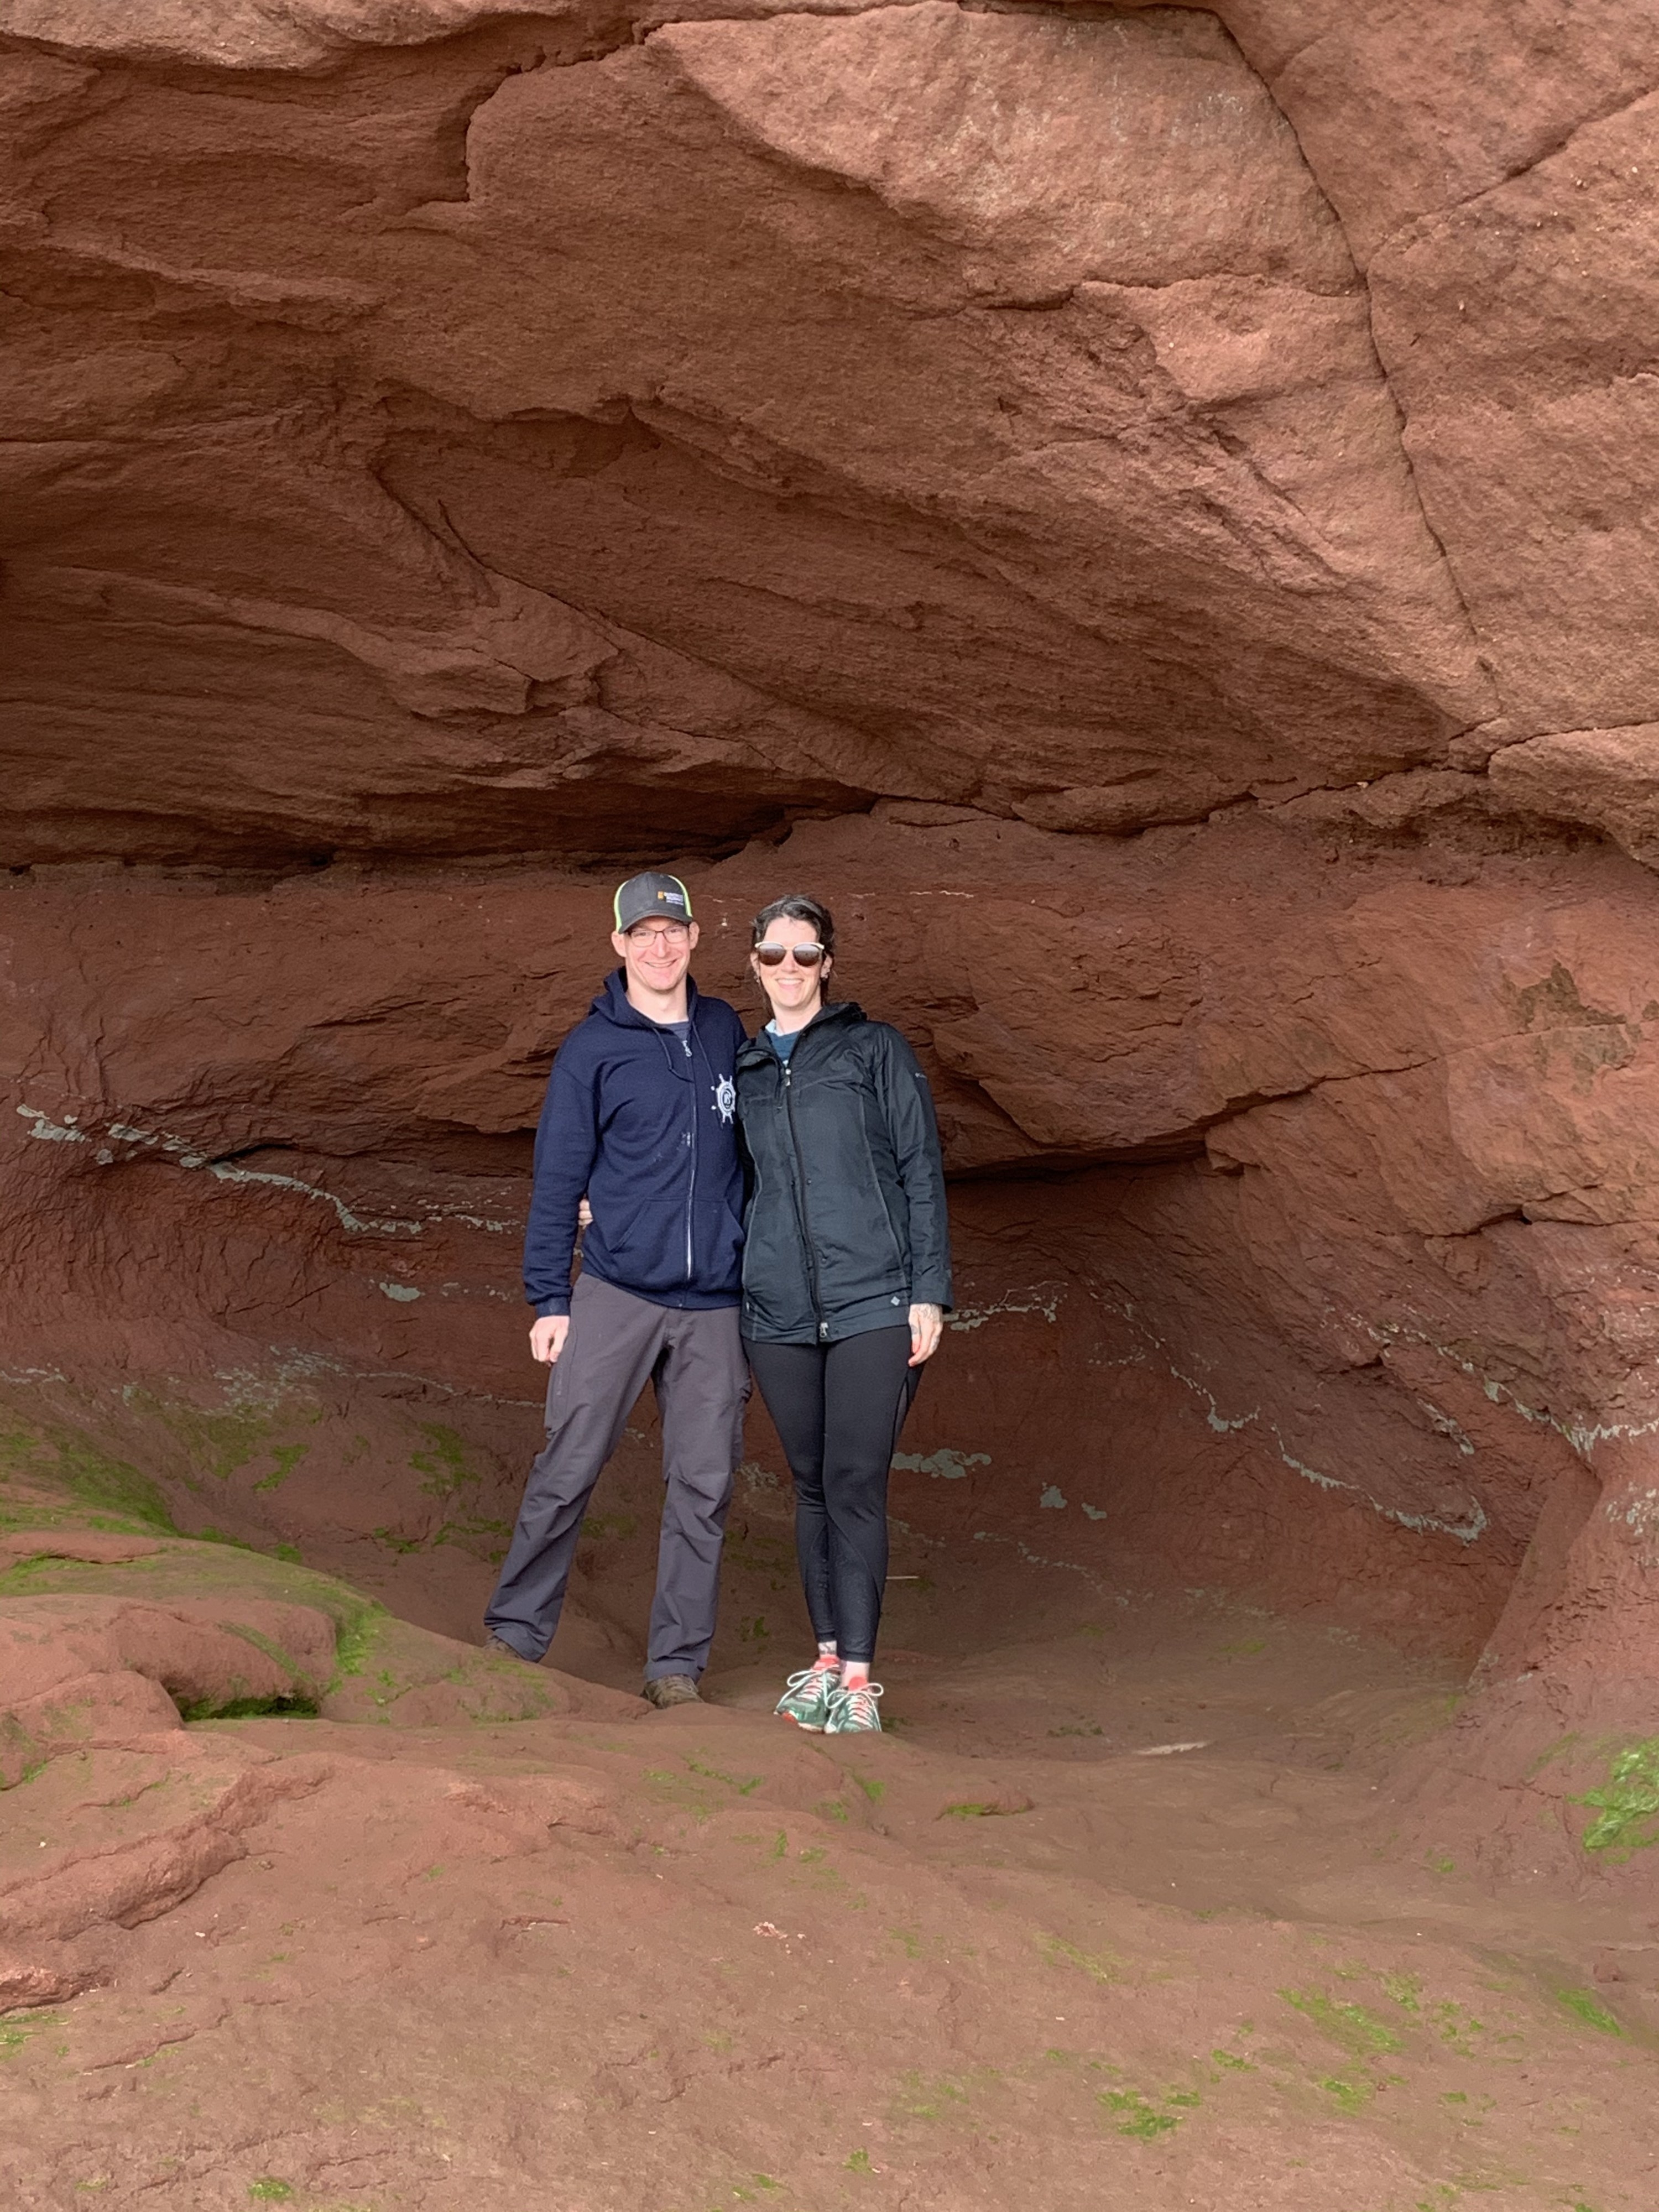 A man and woman stand together in a brown rock alcove along the ocean floor